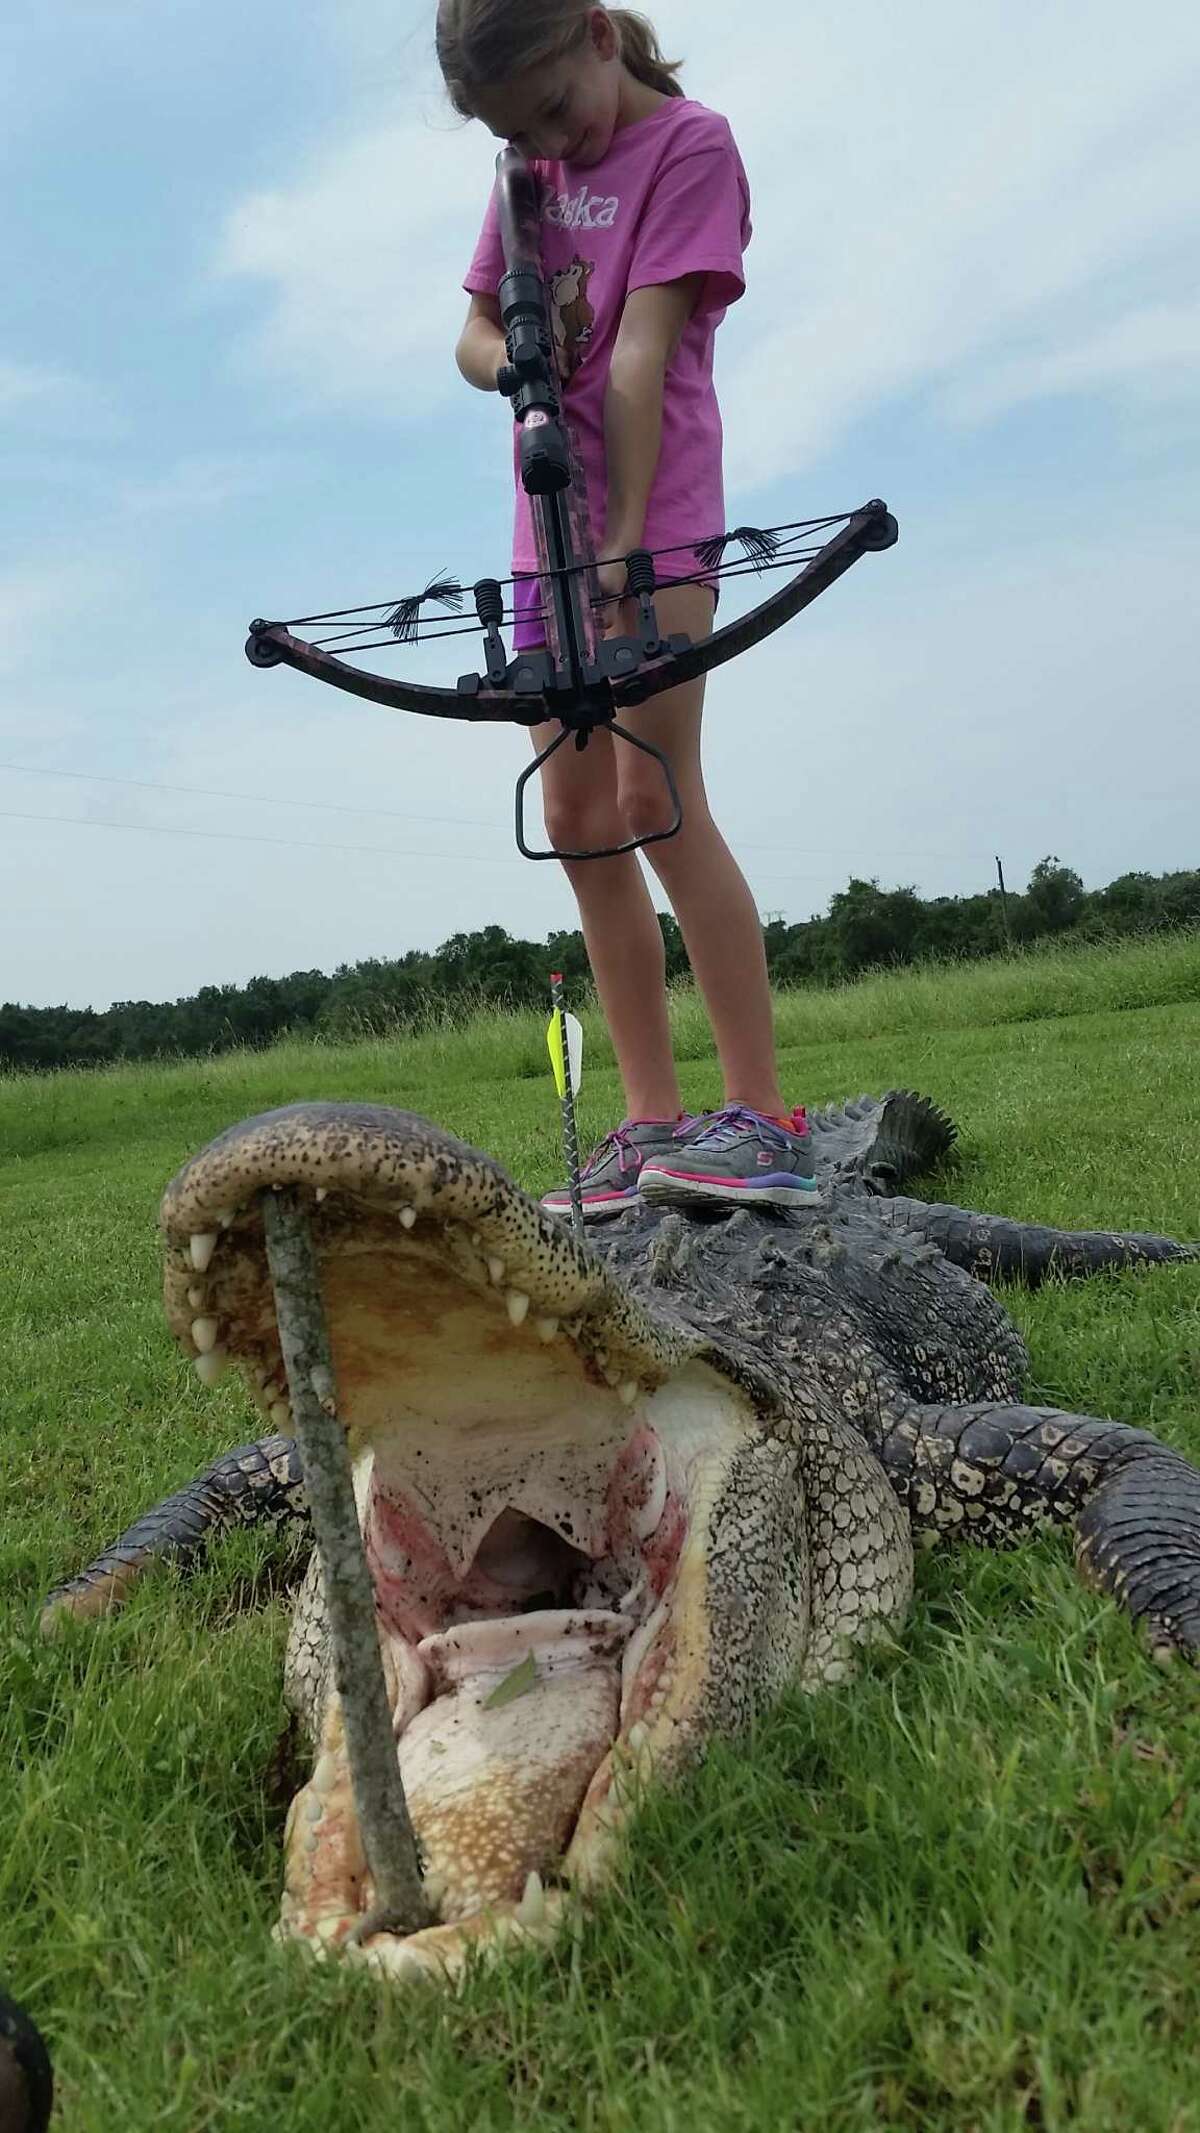 A 10-year-old Texas girl shot and killed an 800-pound alligator Sunday with crossbow from about 15 yards on the Guadalupe River in South Texas.